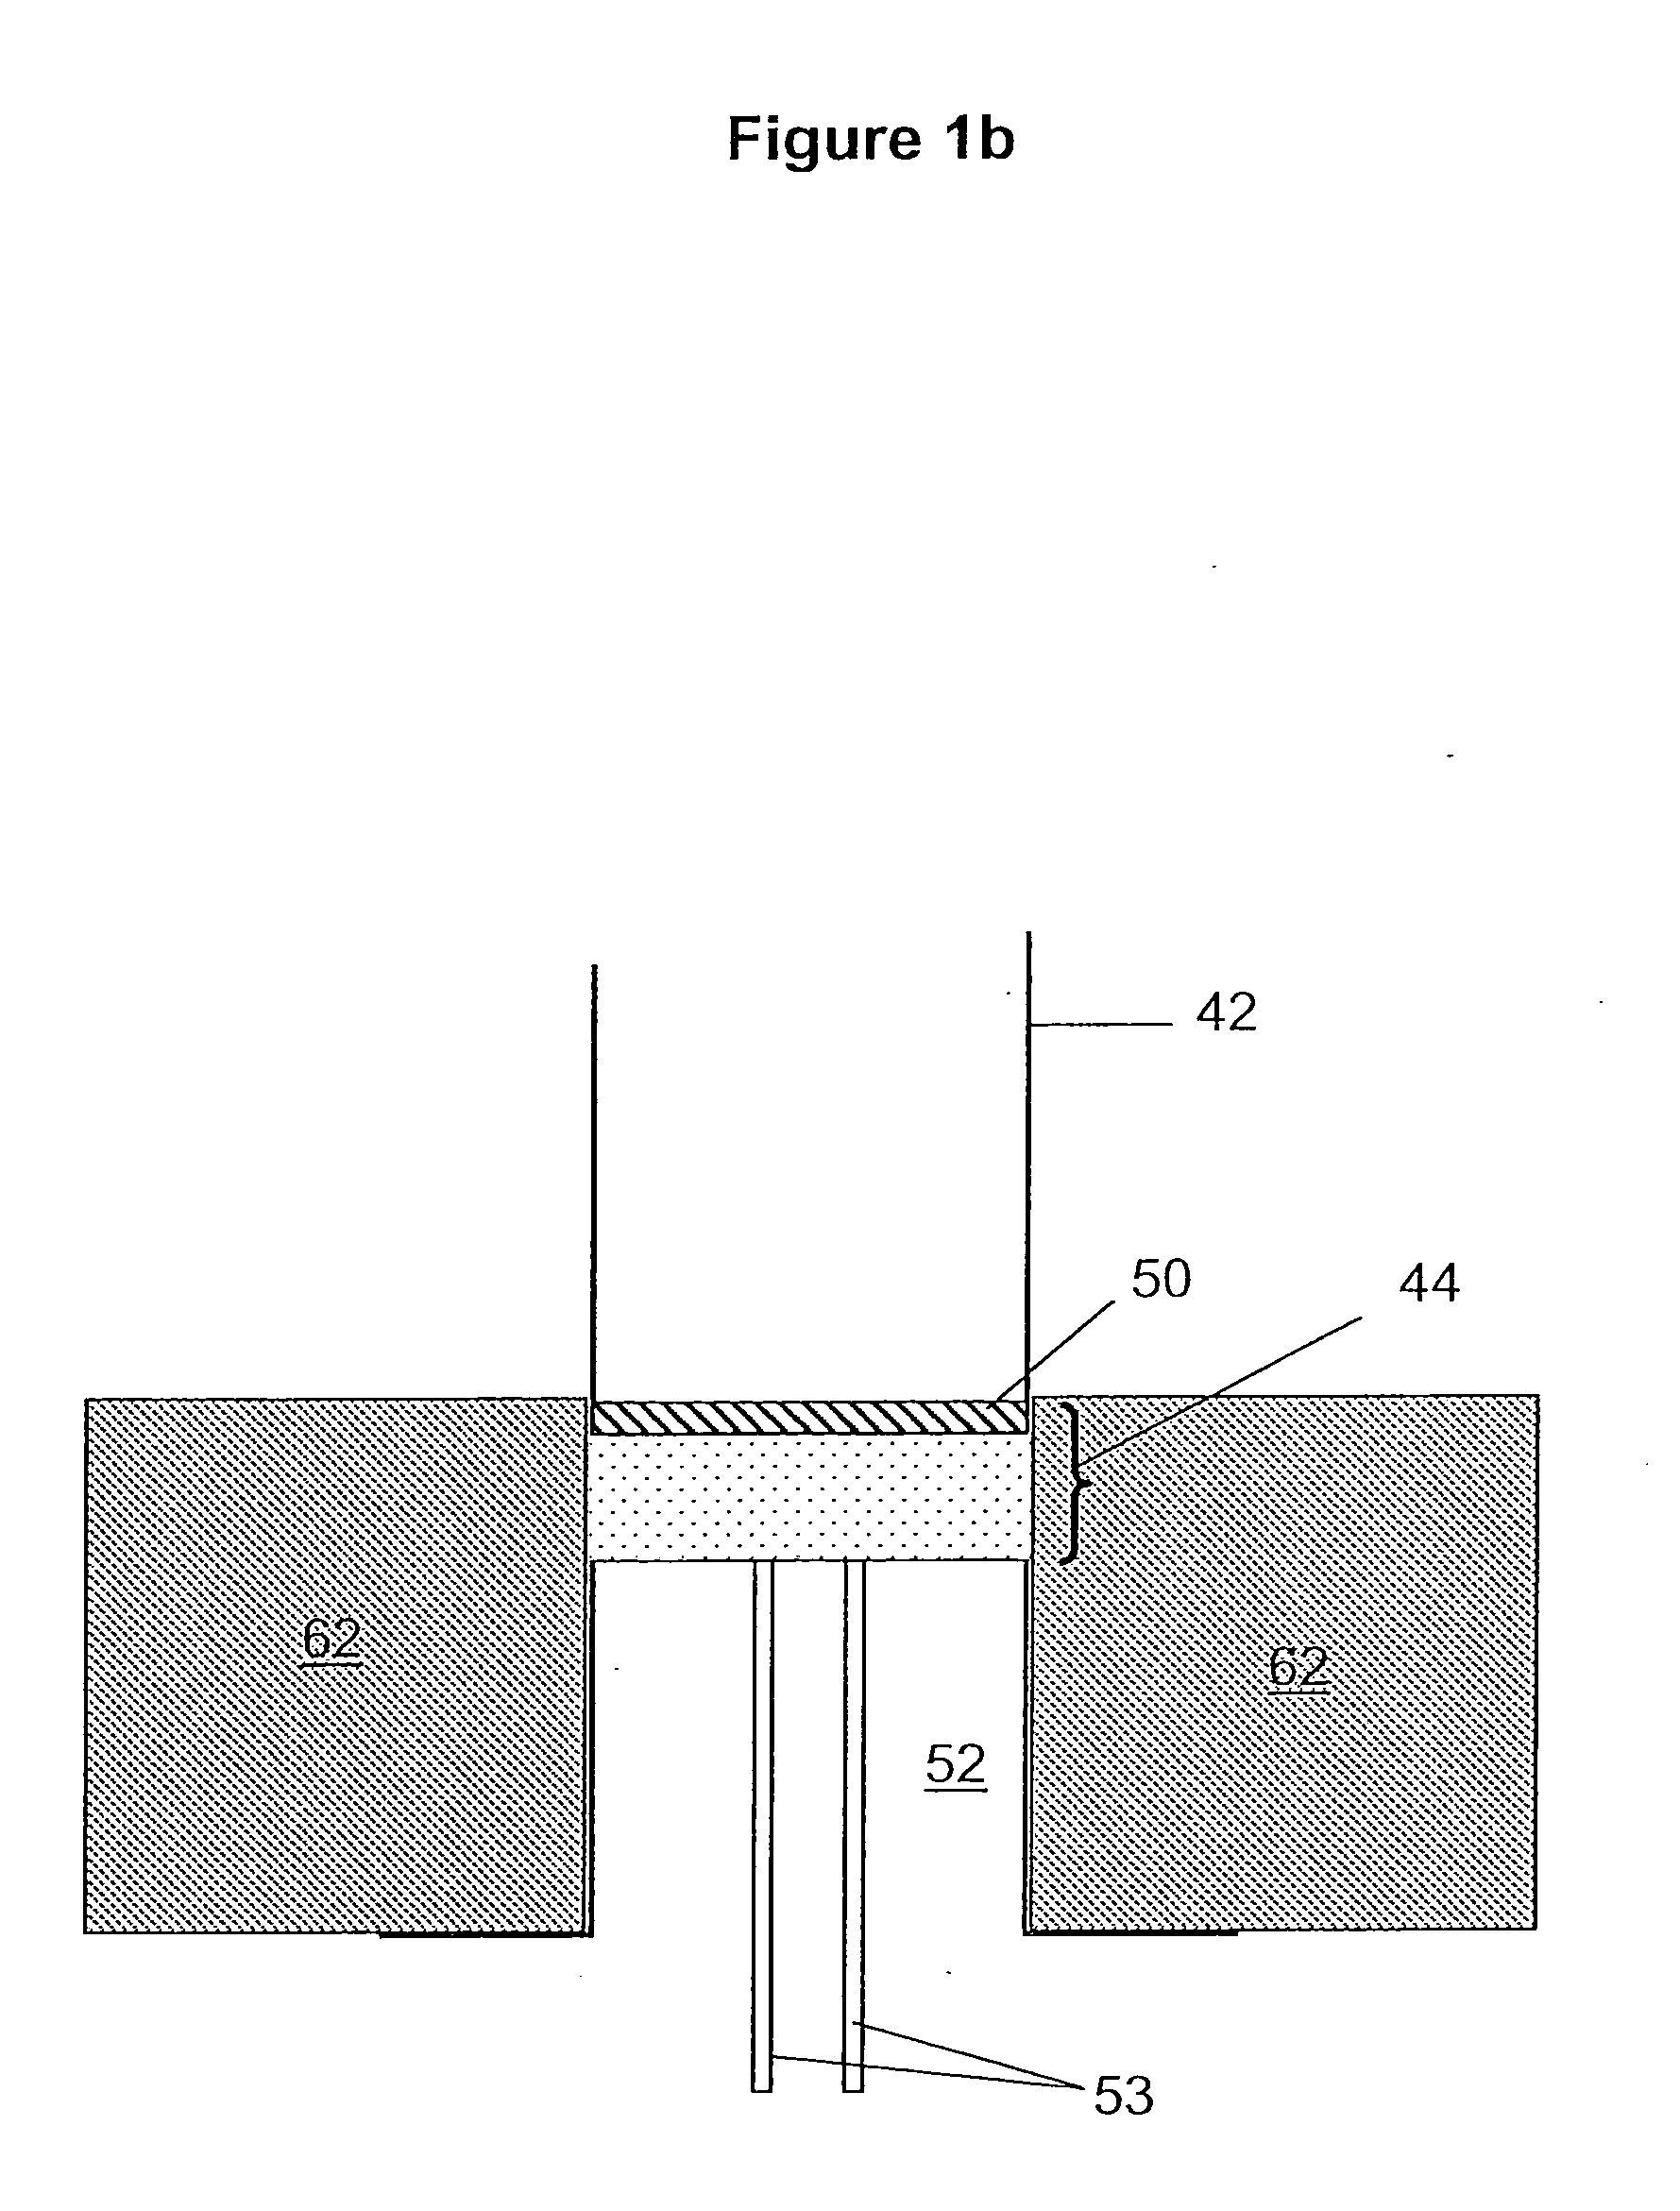 System and method for thermal analysis using variable thermal resistance